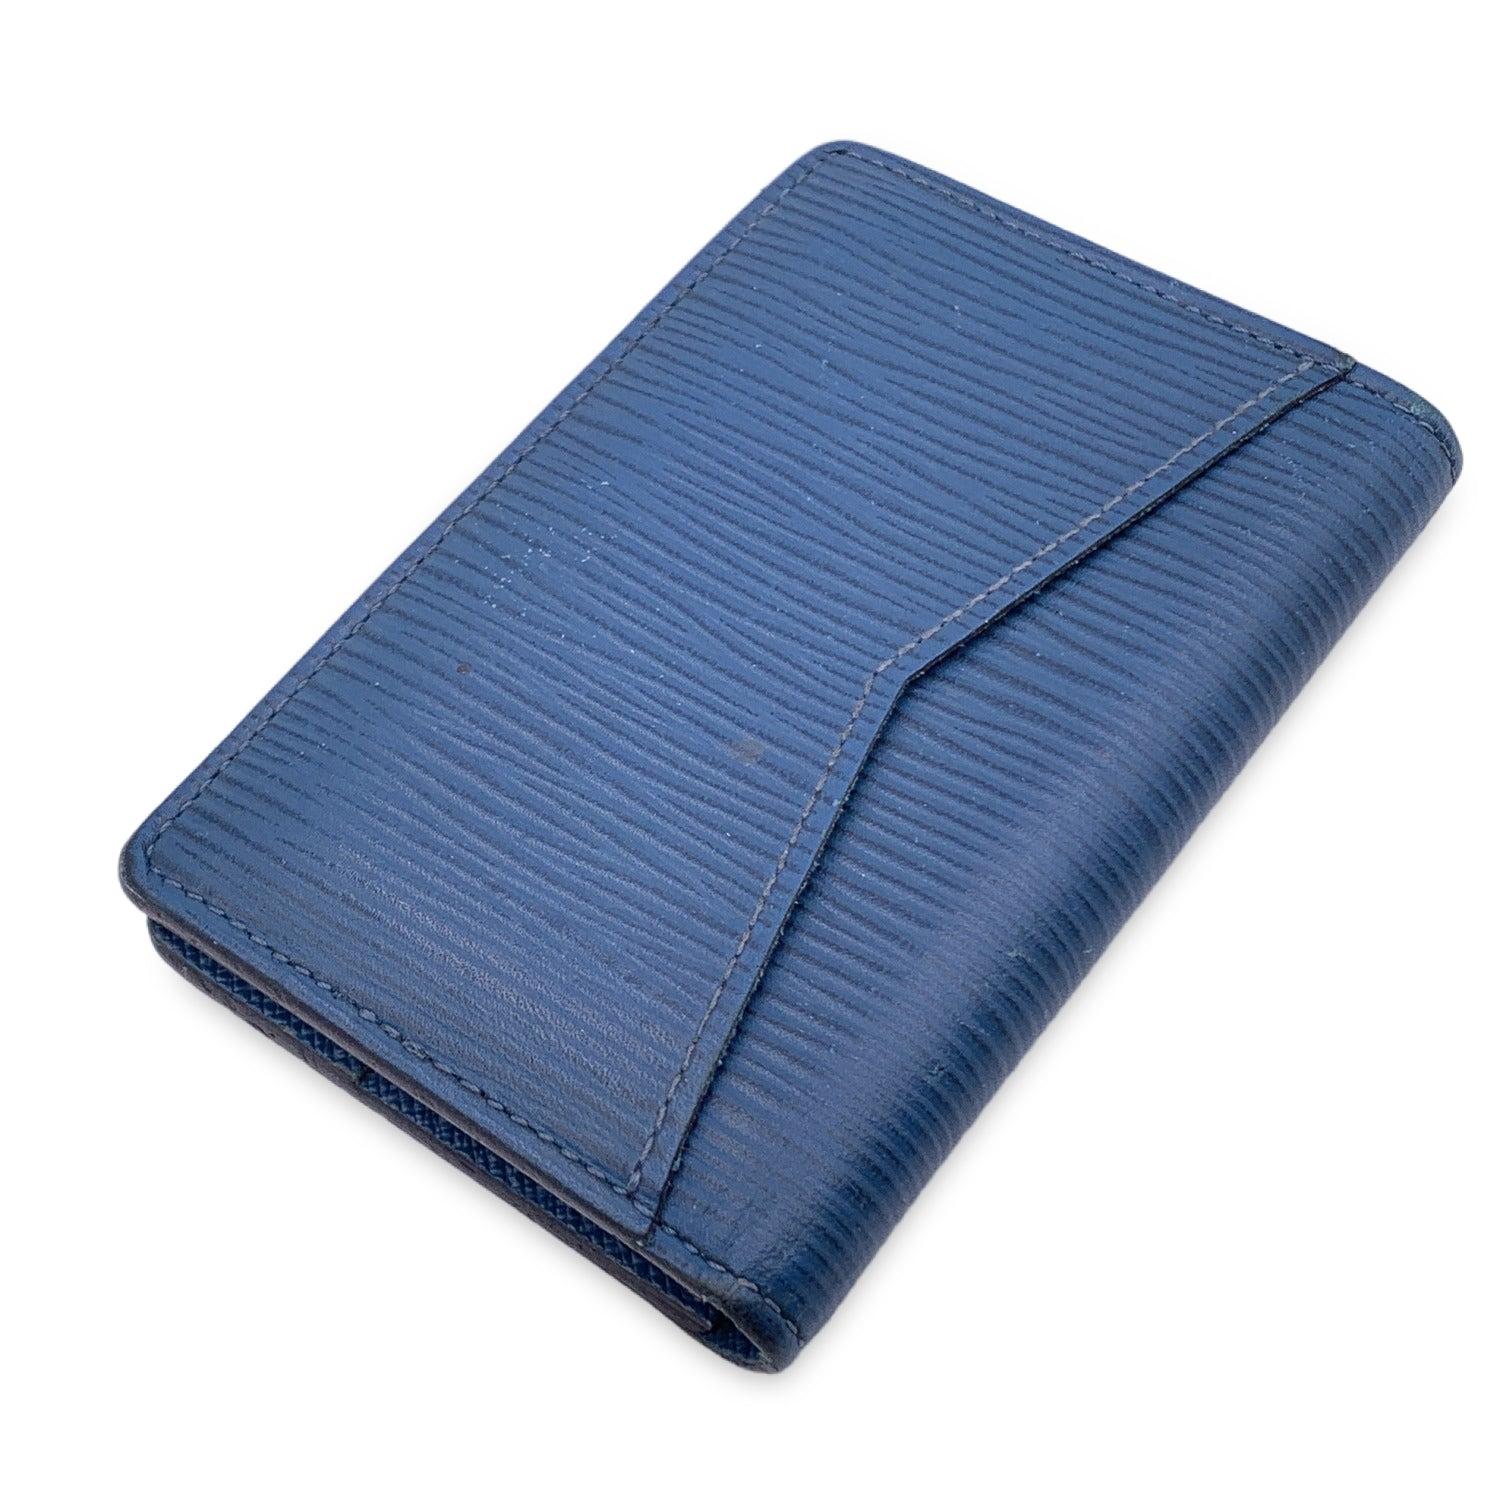 Louis Vuitton Blue Epi Leather Card Holder Pocket Organizer Wallet In Good Condition For Sale In Rome, Rome